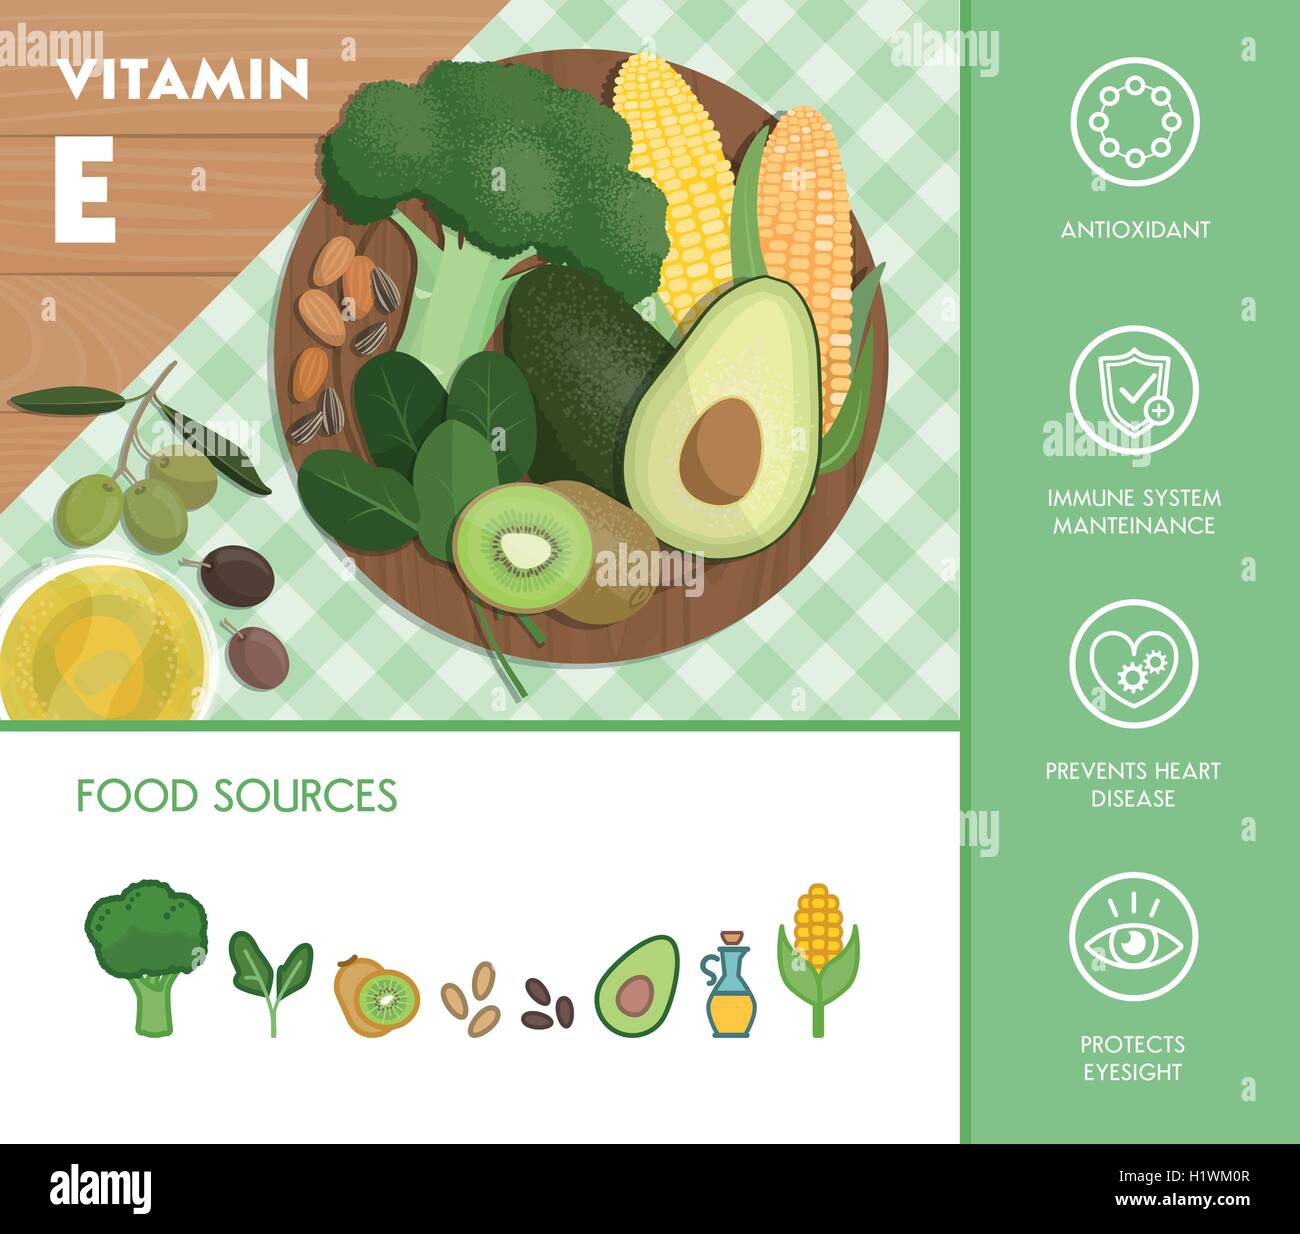 Vitamin Ex food sources and health benefits, vegetables and fruit composition on a chopping board and icons set Stock Vector